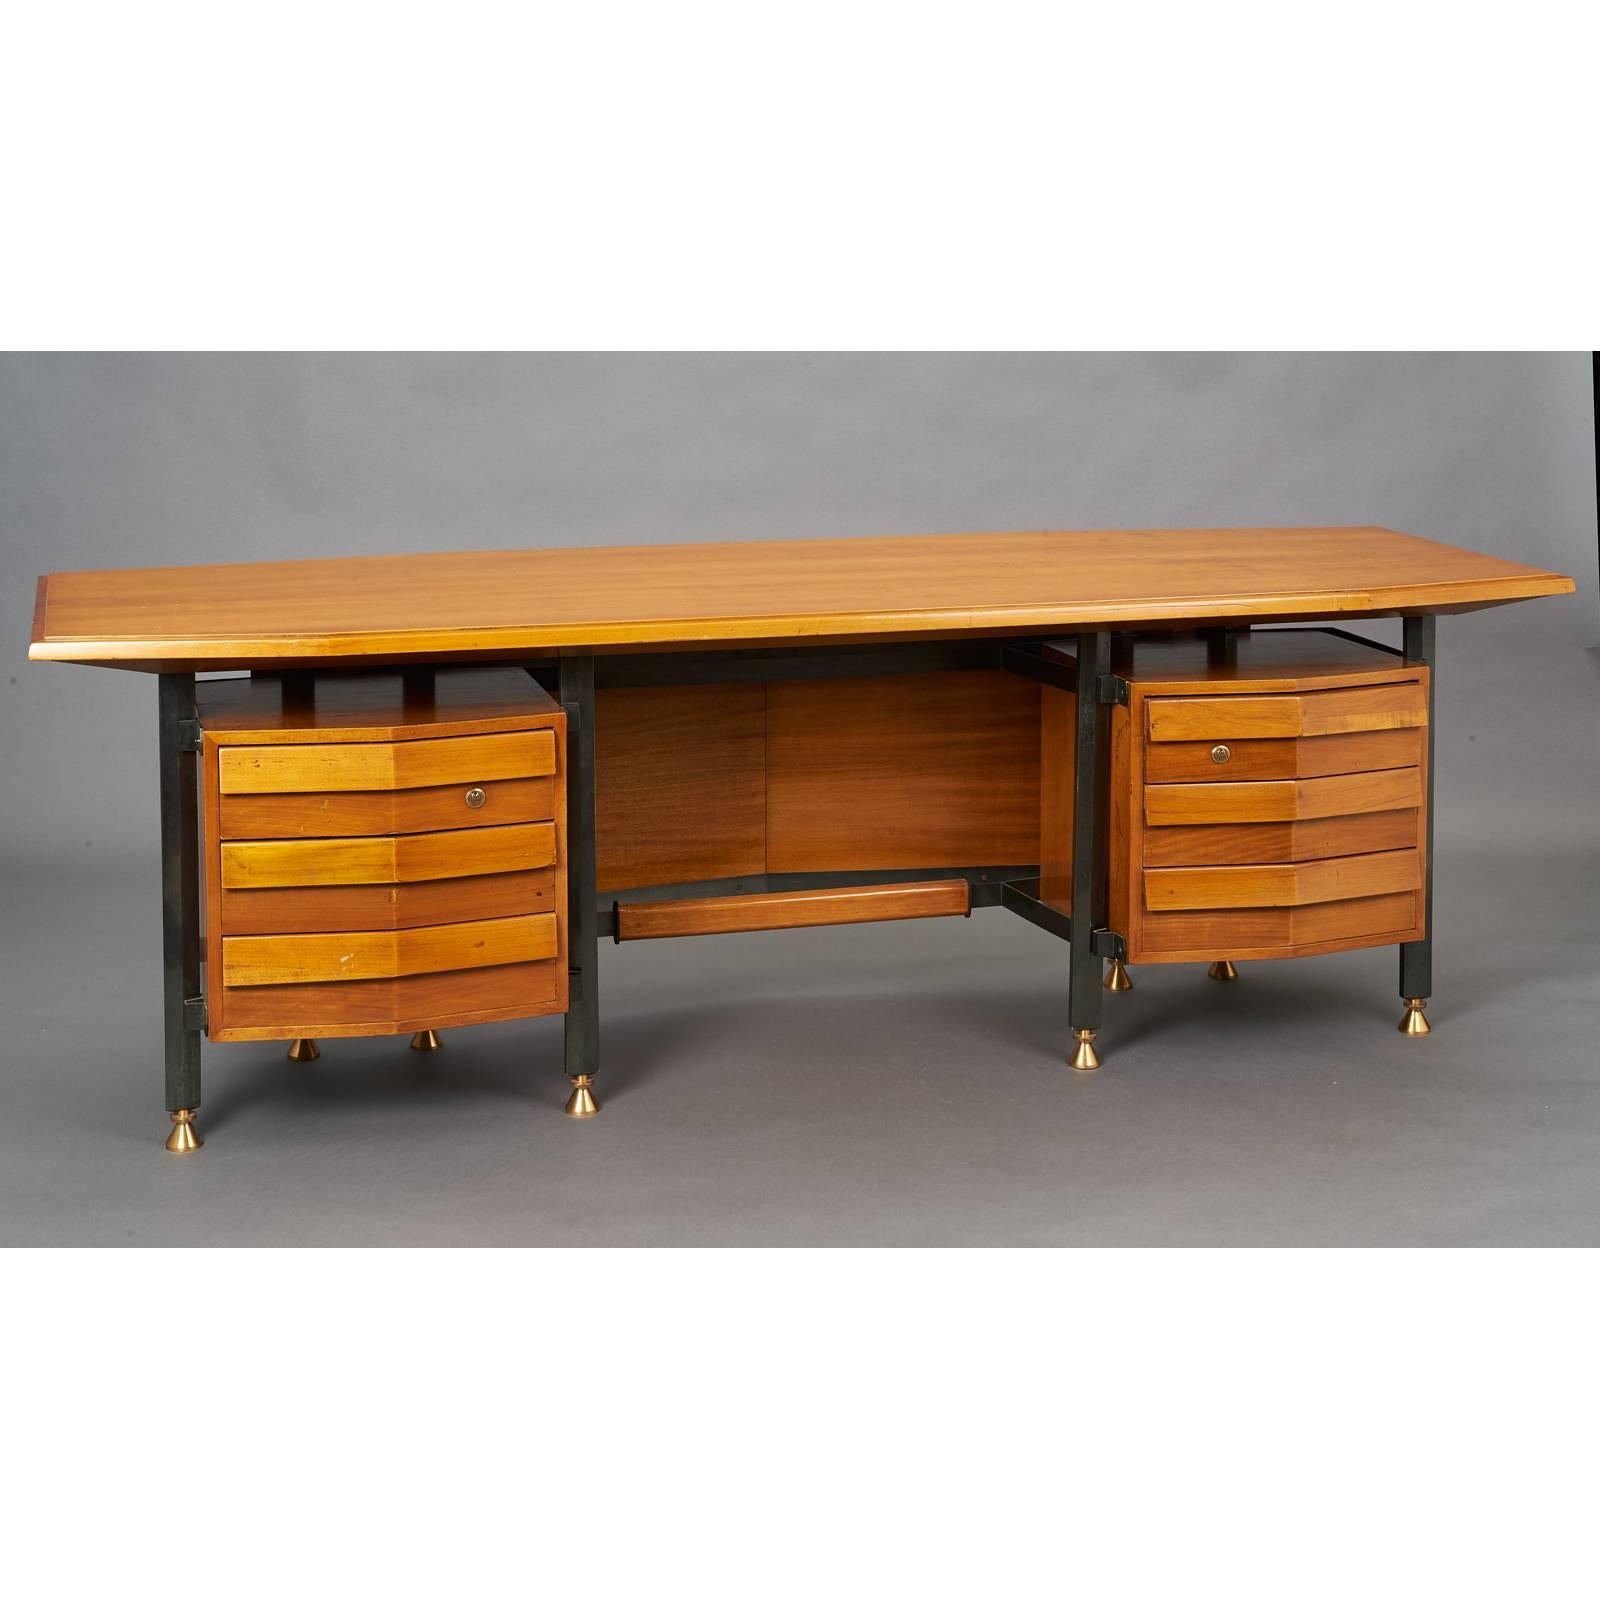 Italy, 1950s.
Spectacular 7.5' modernist desk with six angle faced drawers, the shaped writing surface with tapered ends, mounted on oxidized bronze legs repeating the tapered form of the desktop, with contrasting bronze feet. Angled modesty panel,